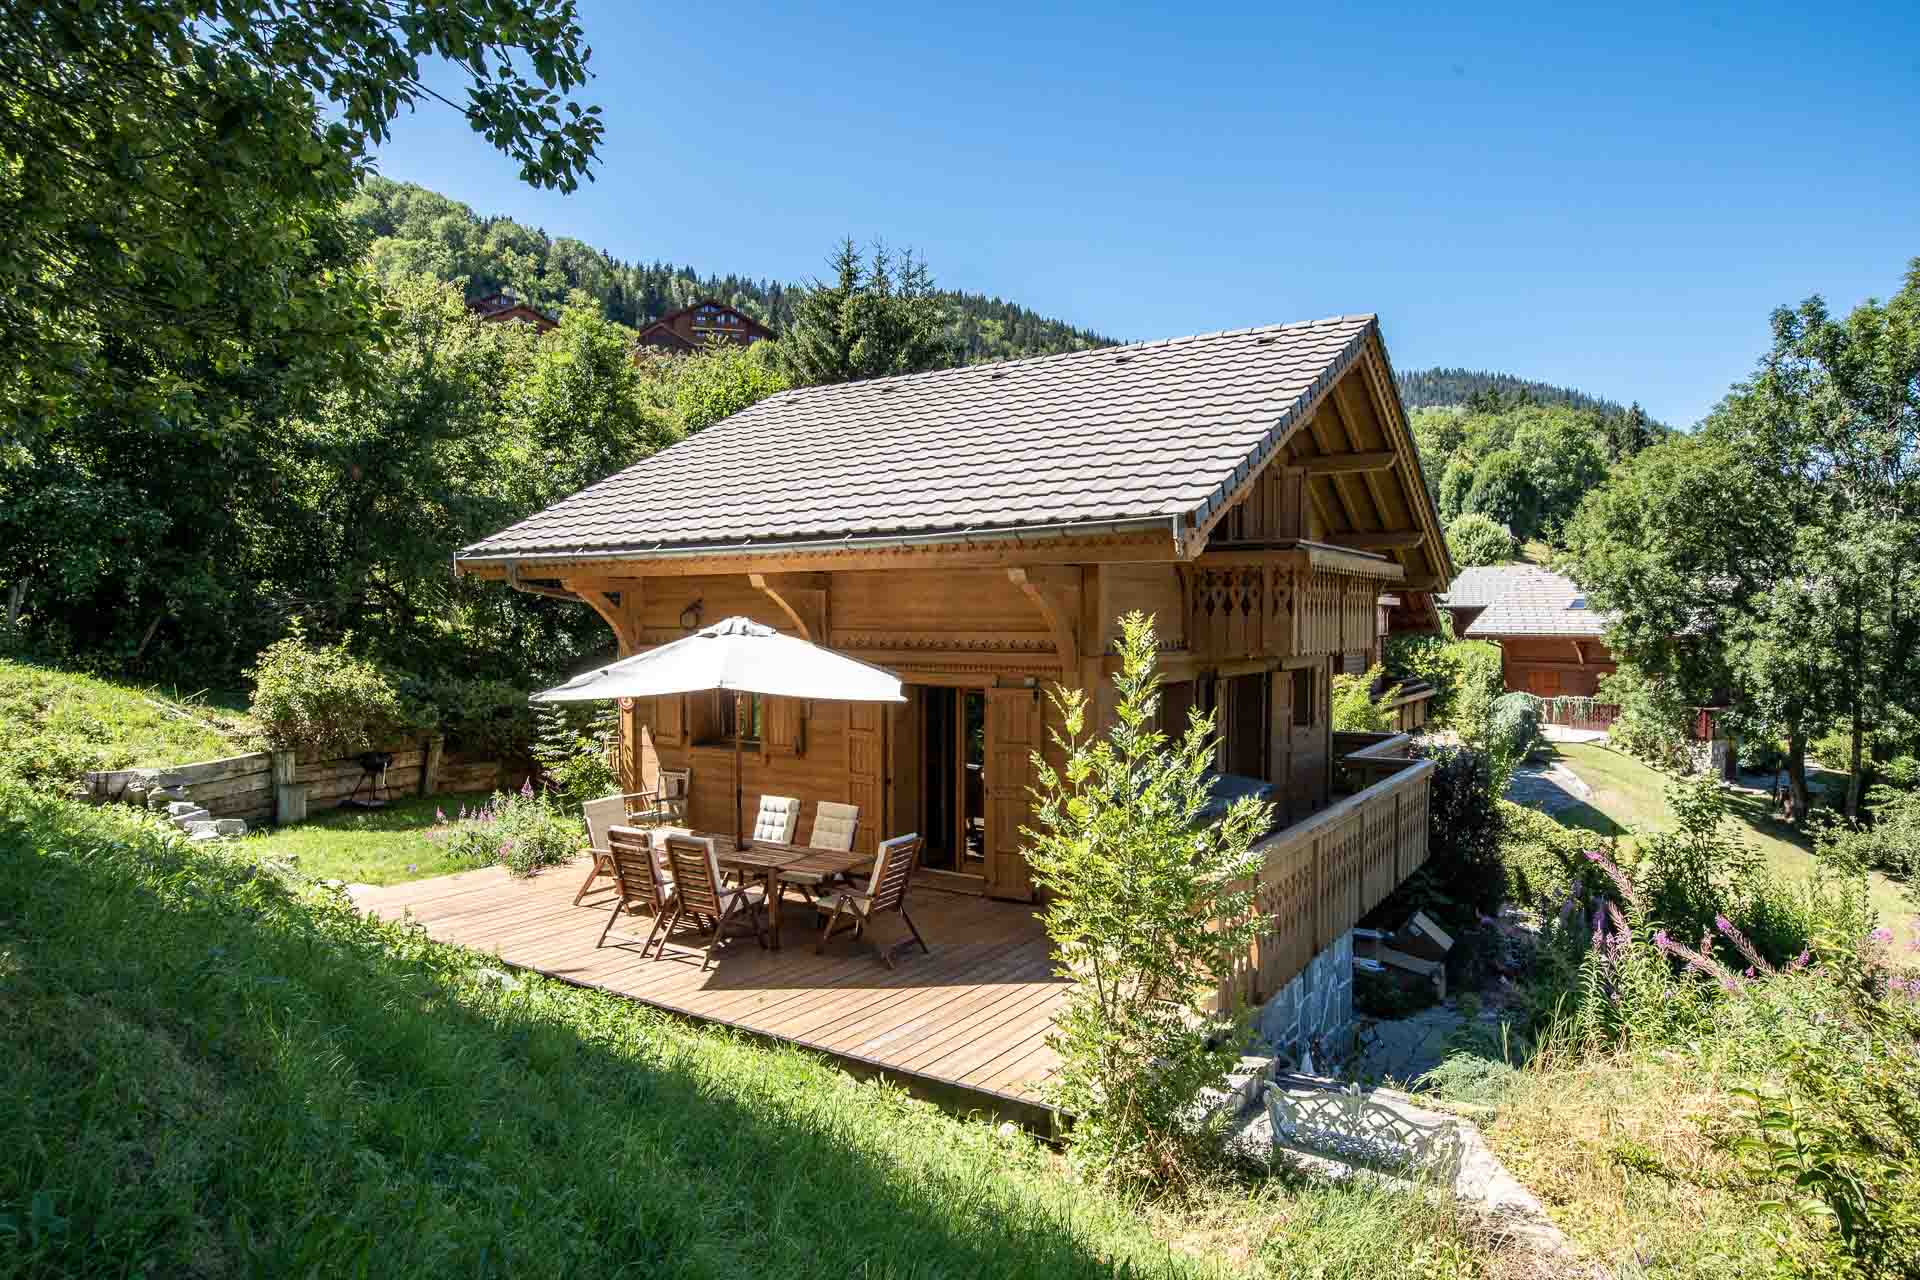 An excellent family Chalet in Les Allues - Free Spirit Alpine